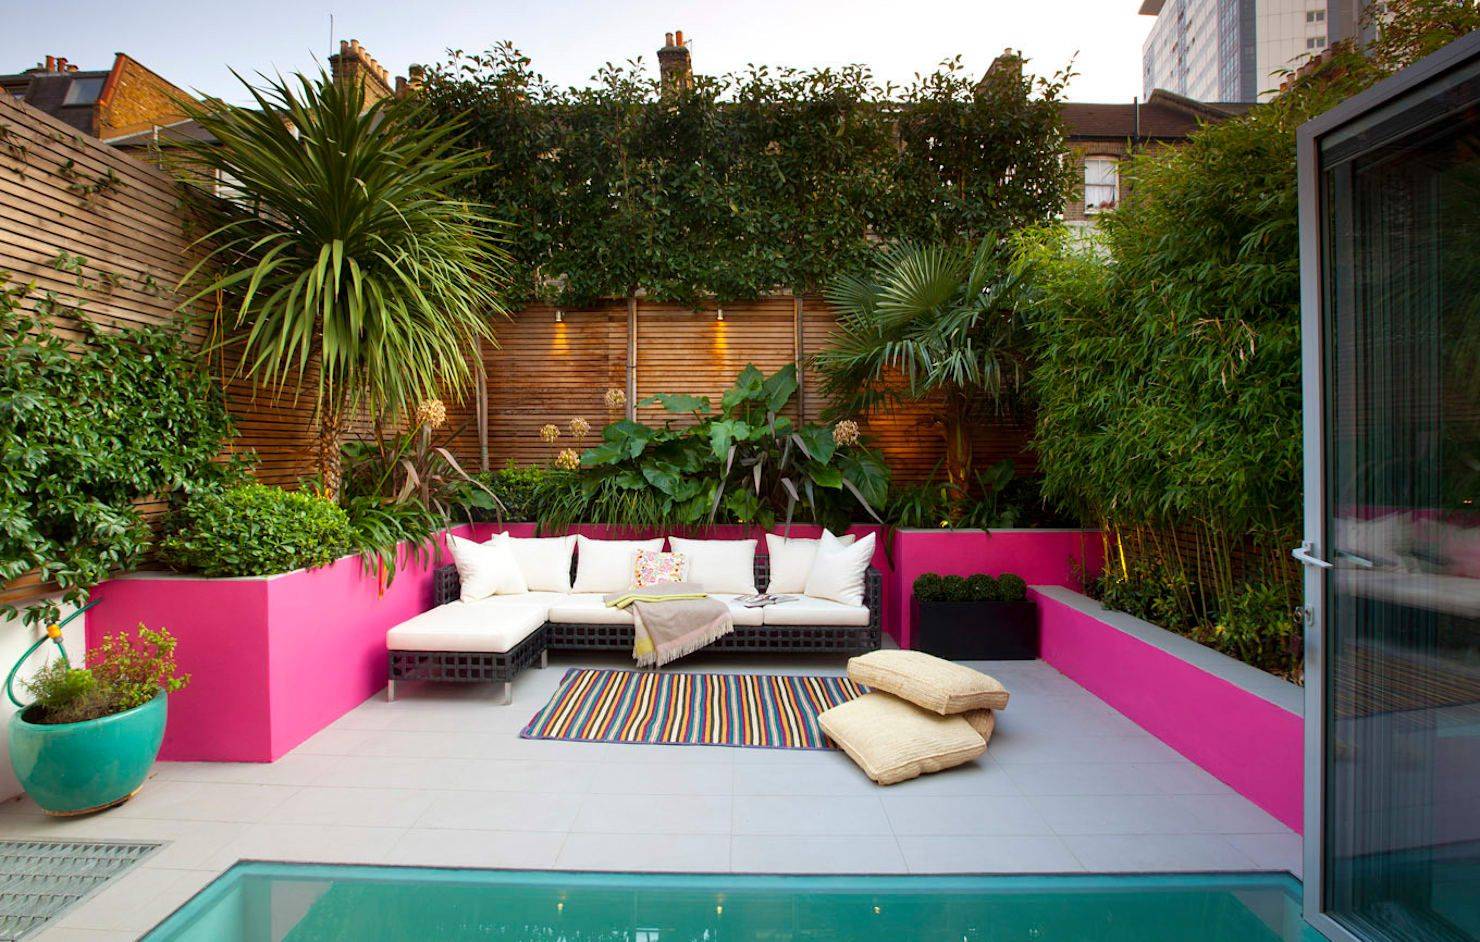 How We Can Learn From Moroccan Style Garden Living